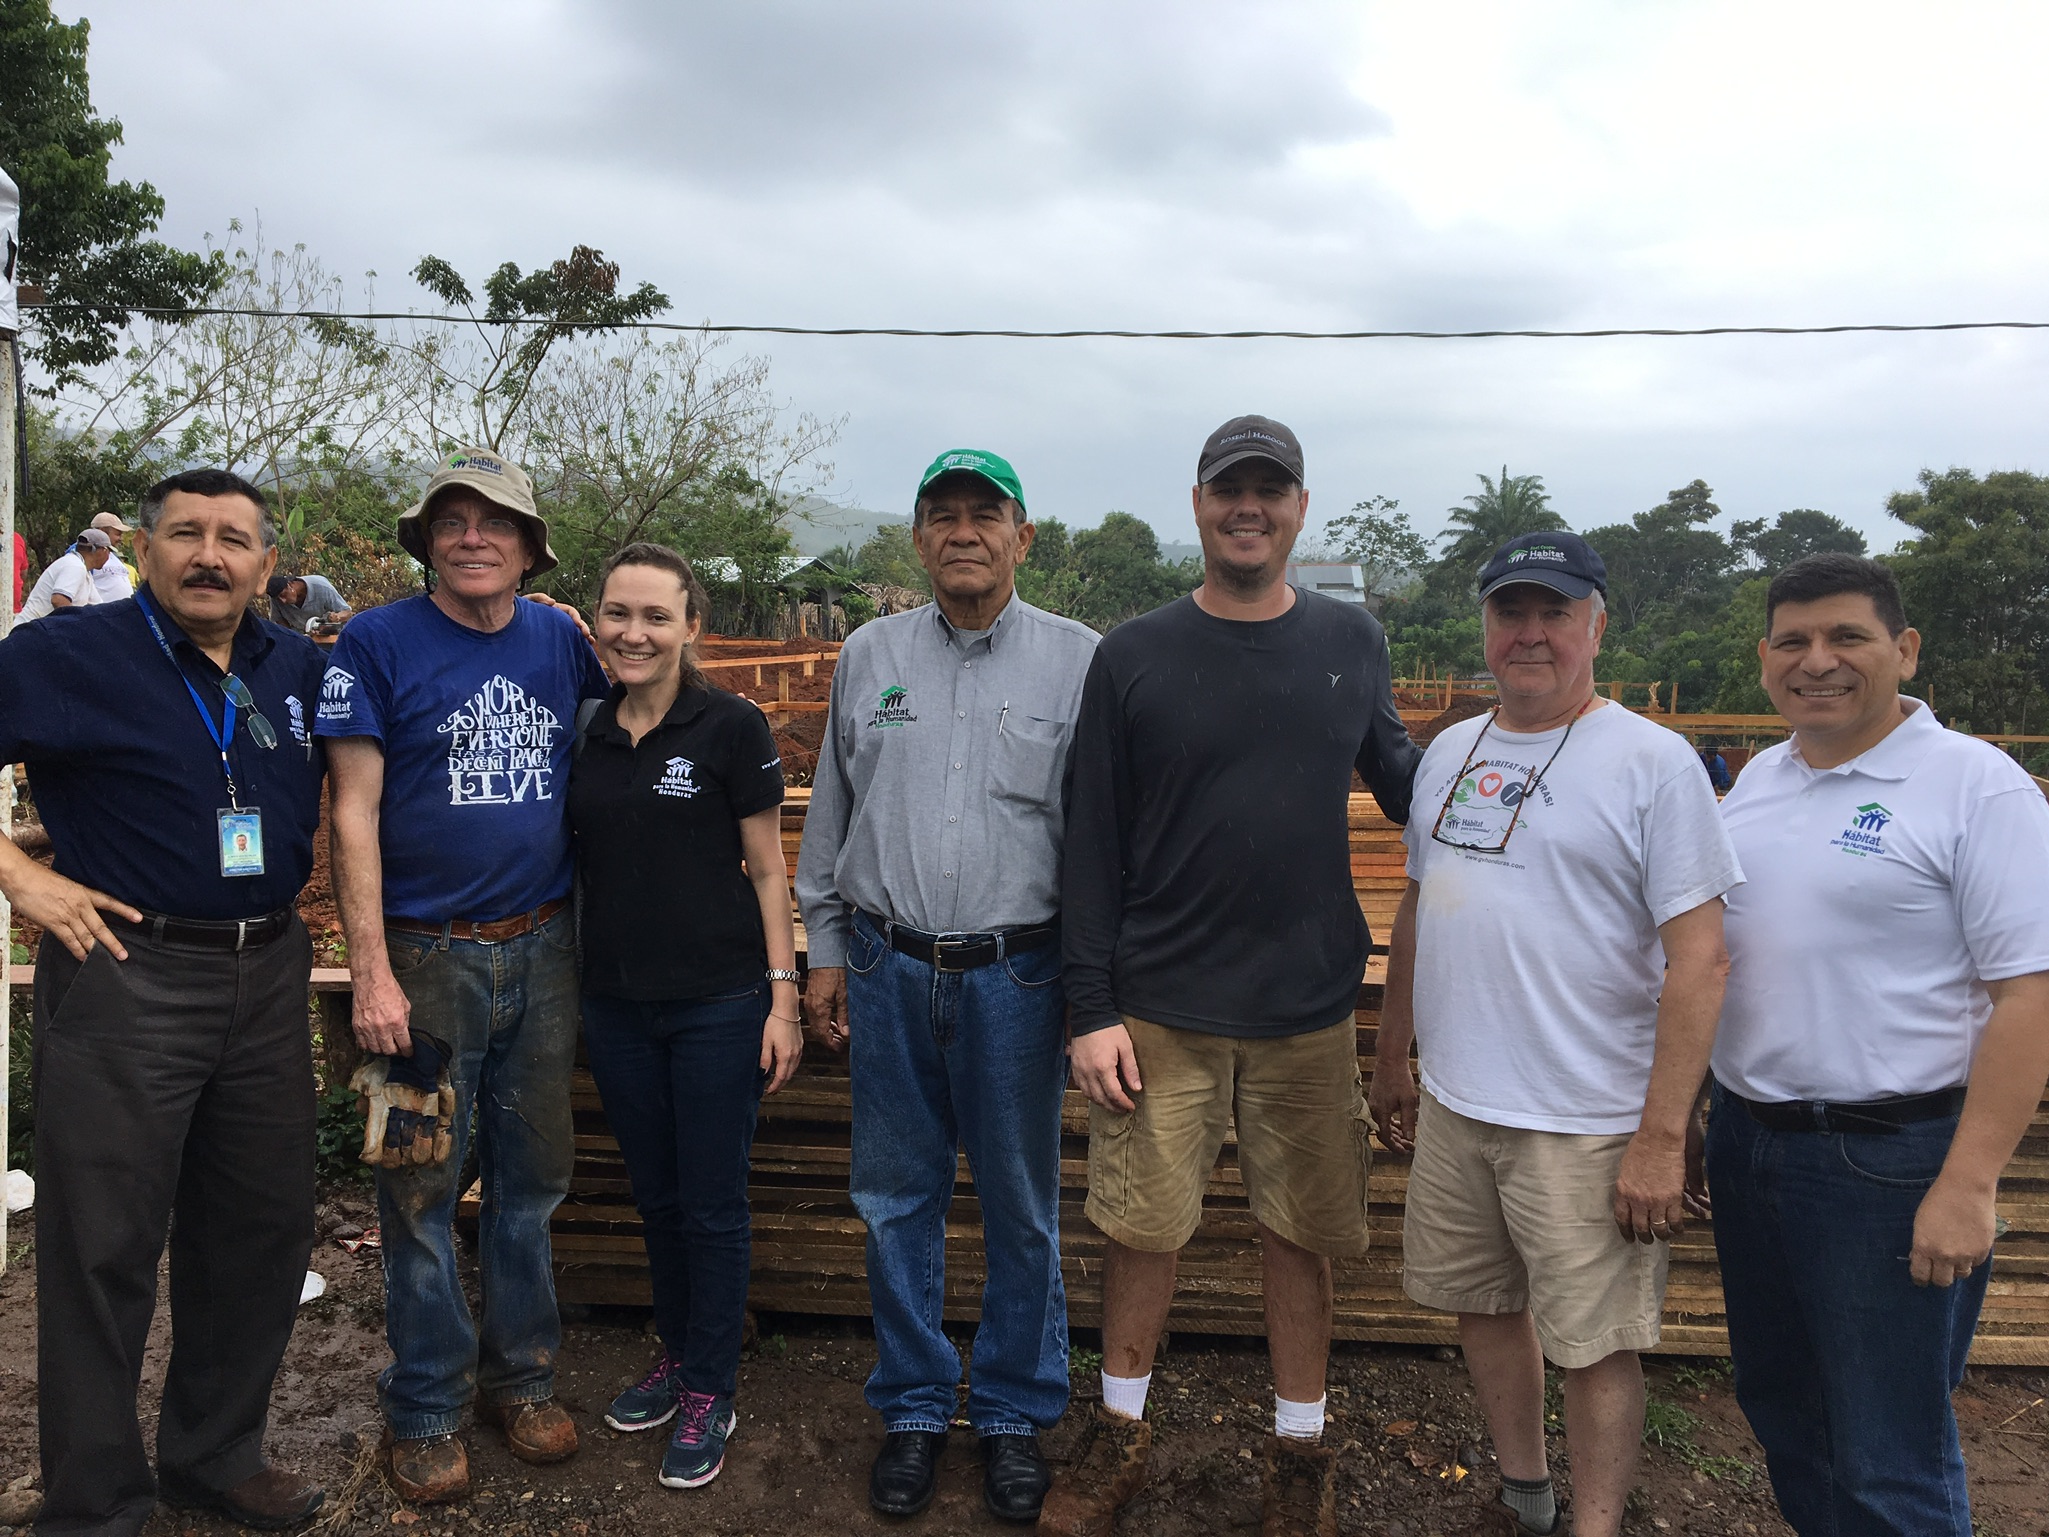 Chip Bruorton describes his trips to Honduras as “rewarding and beneficial” and a way to disconnect and rejuvenate.